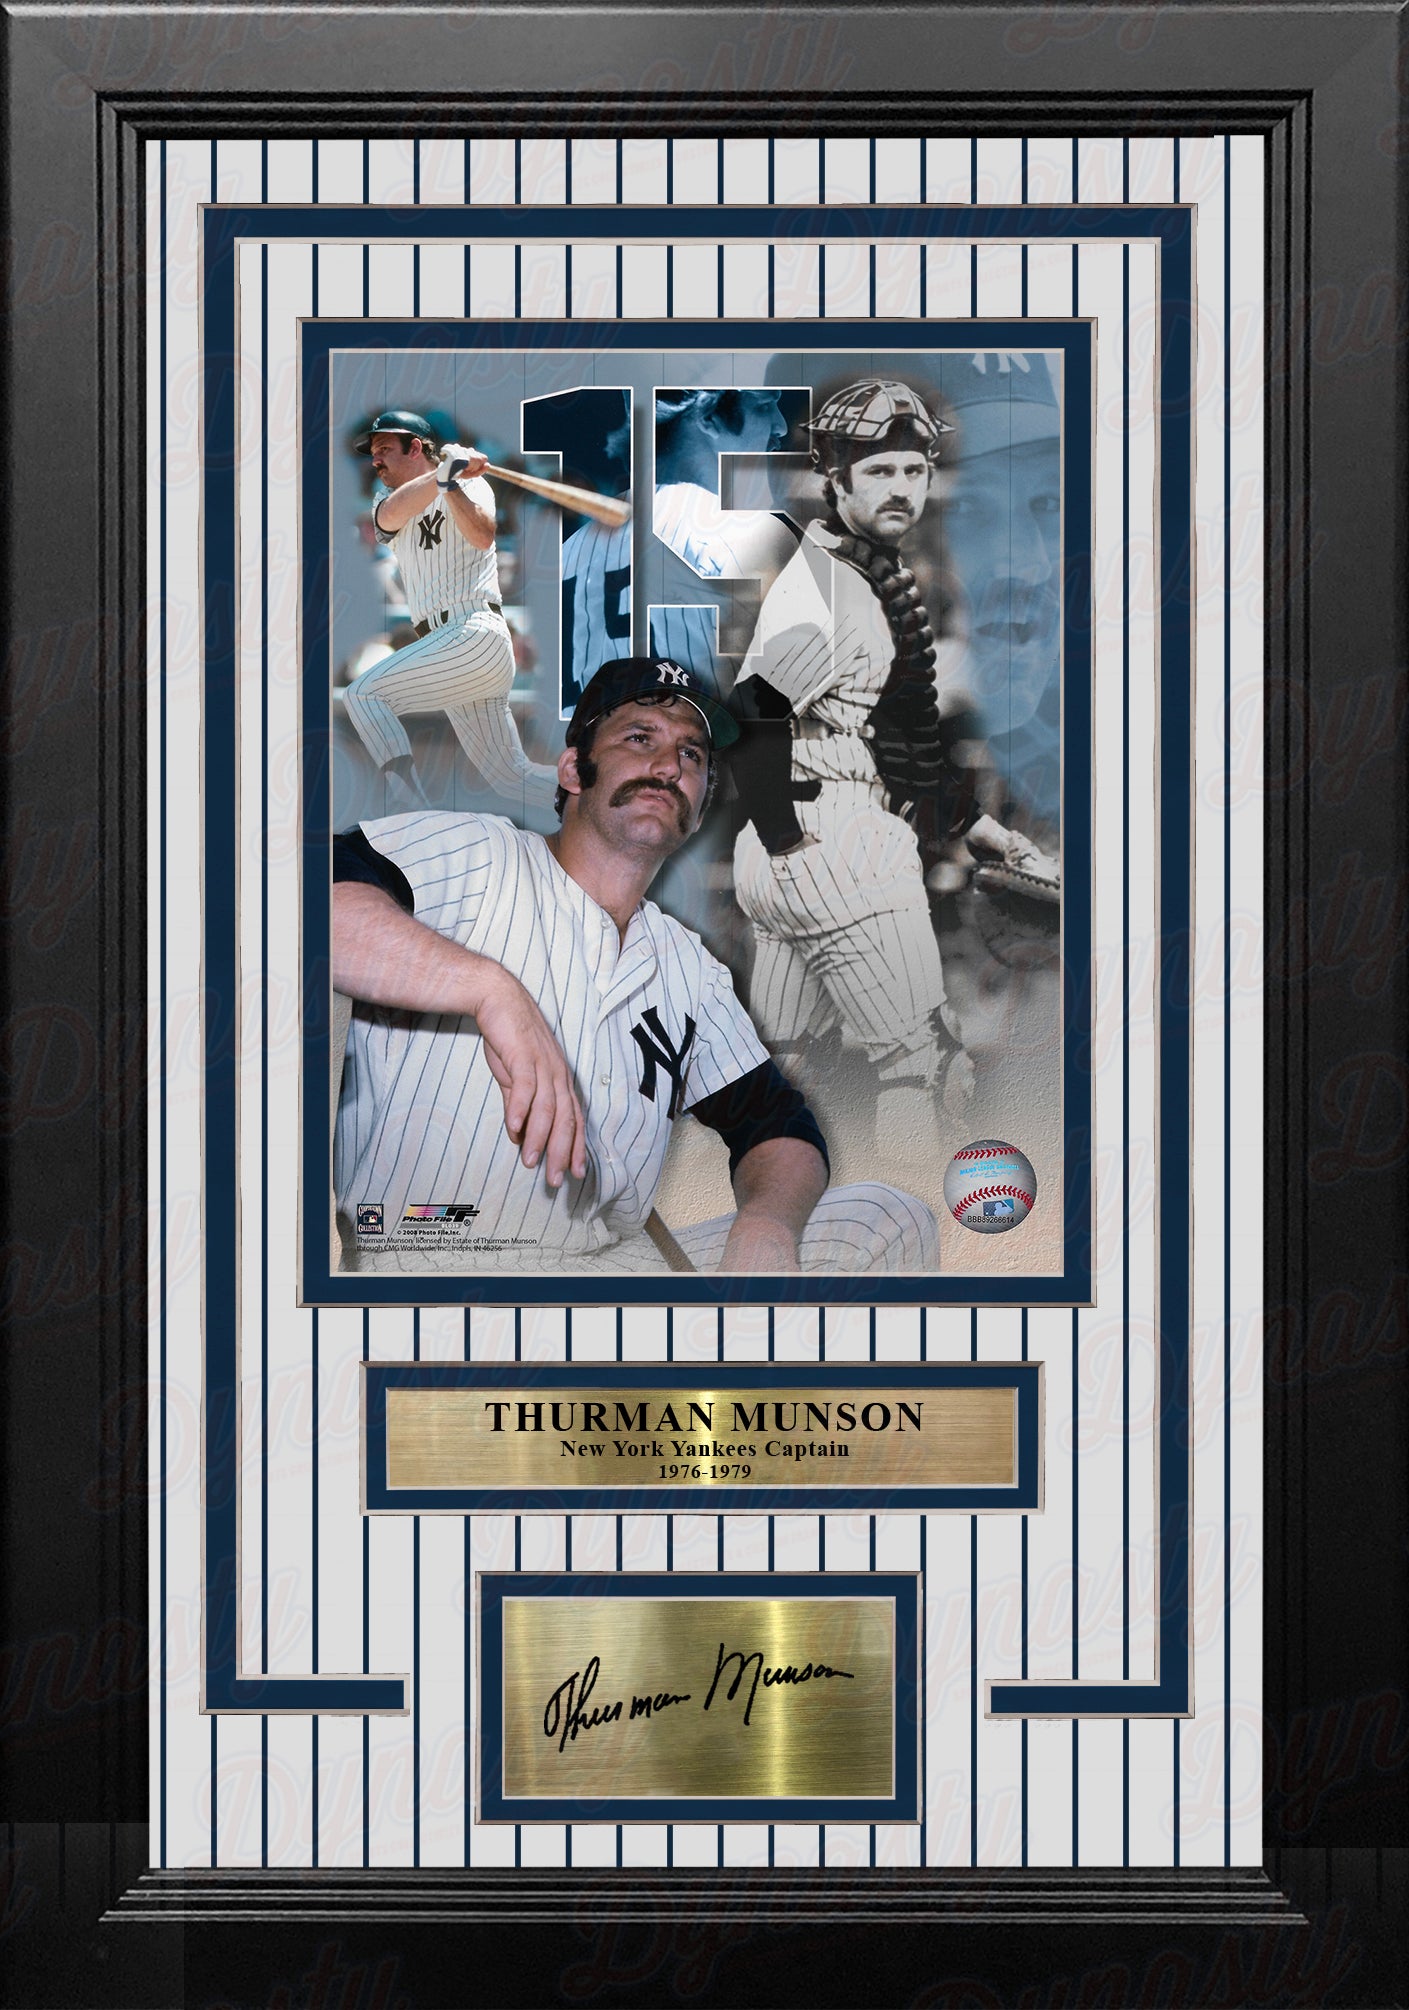 Thurman Munson New York Yankees 8" x 10" Framed Baseball Collage Photo with Engraved Autographs - Dynasty Sports & Framing 